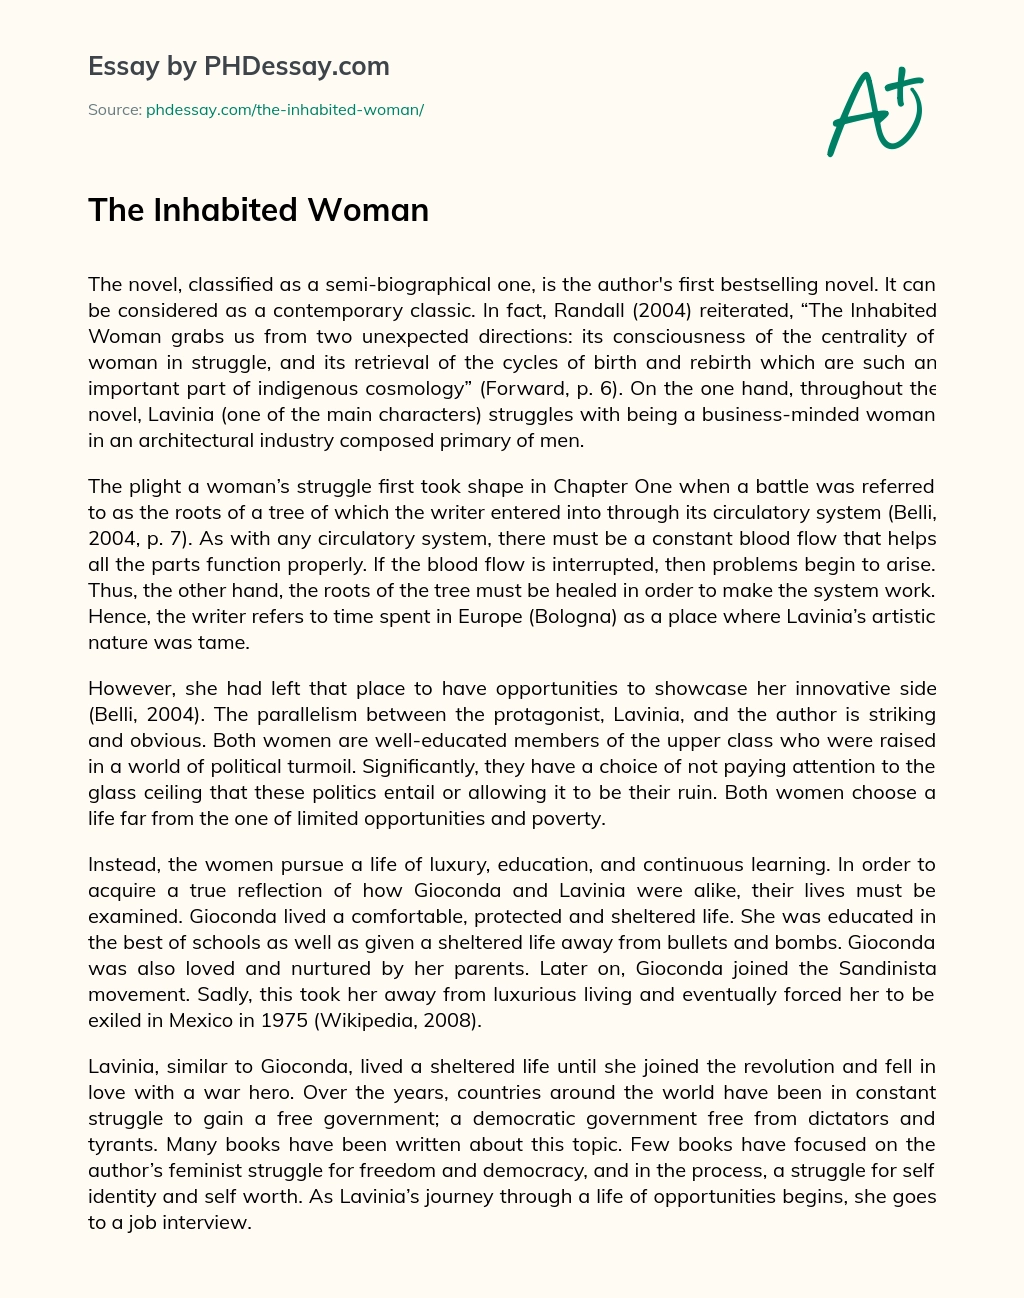 The Inhabited Woman essay